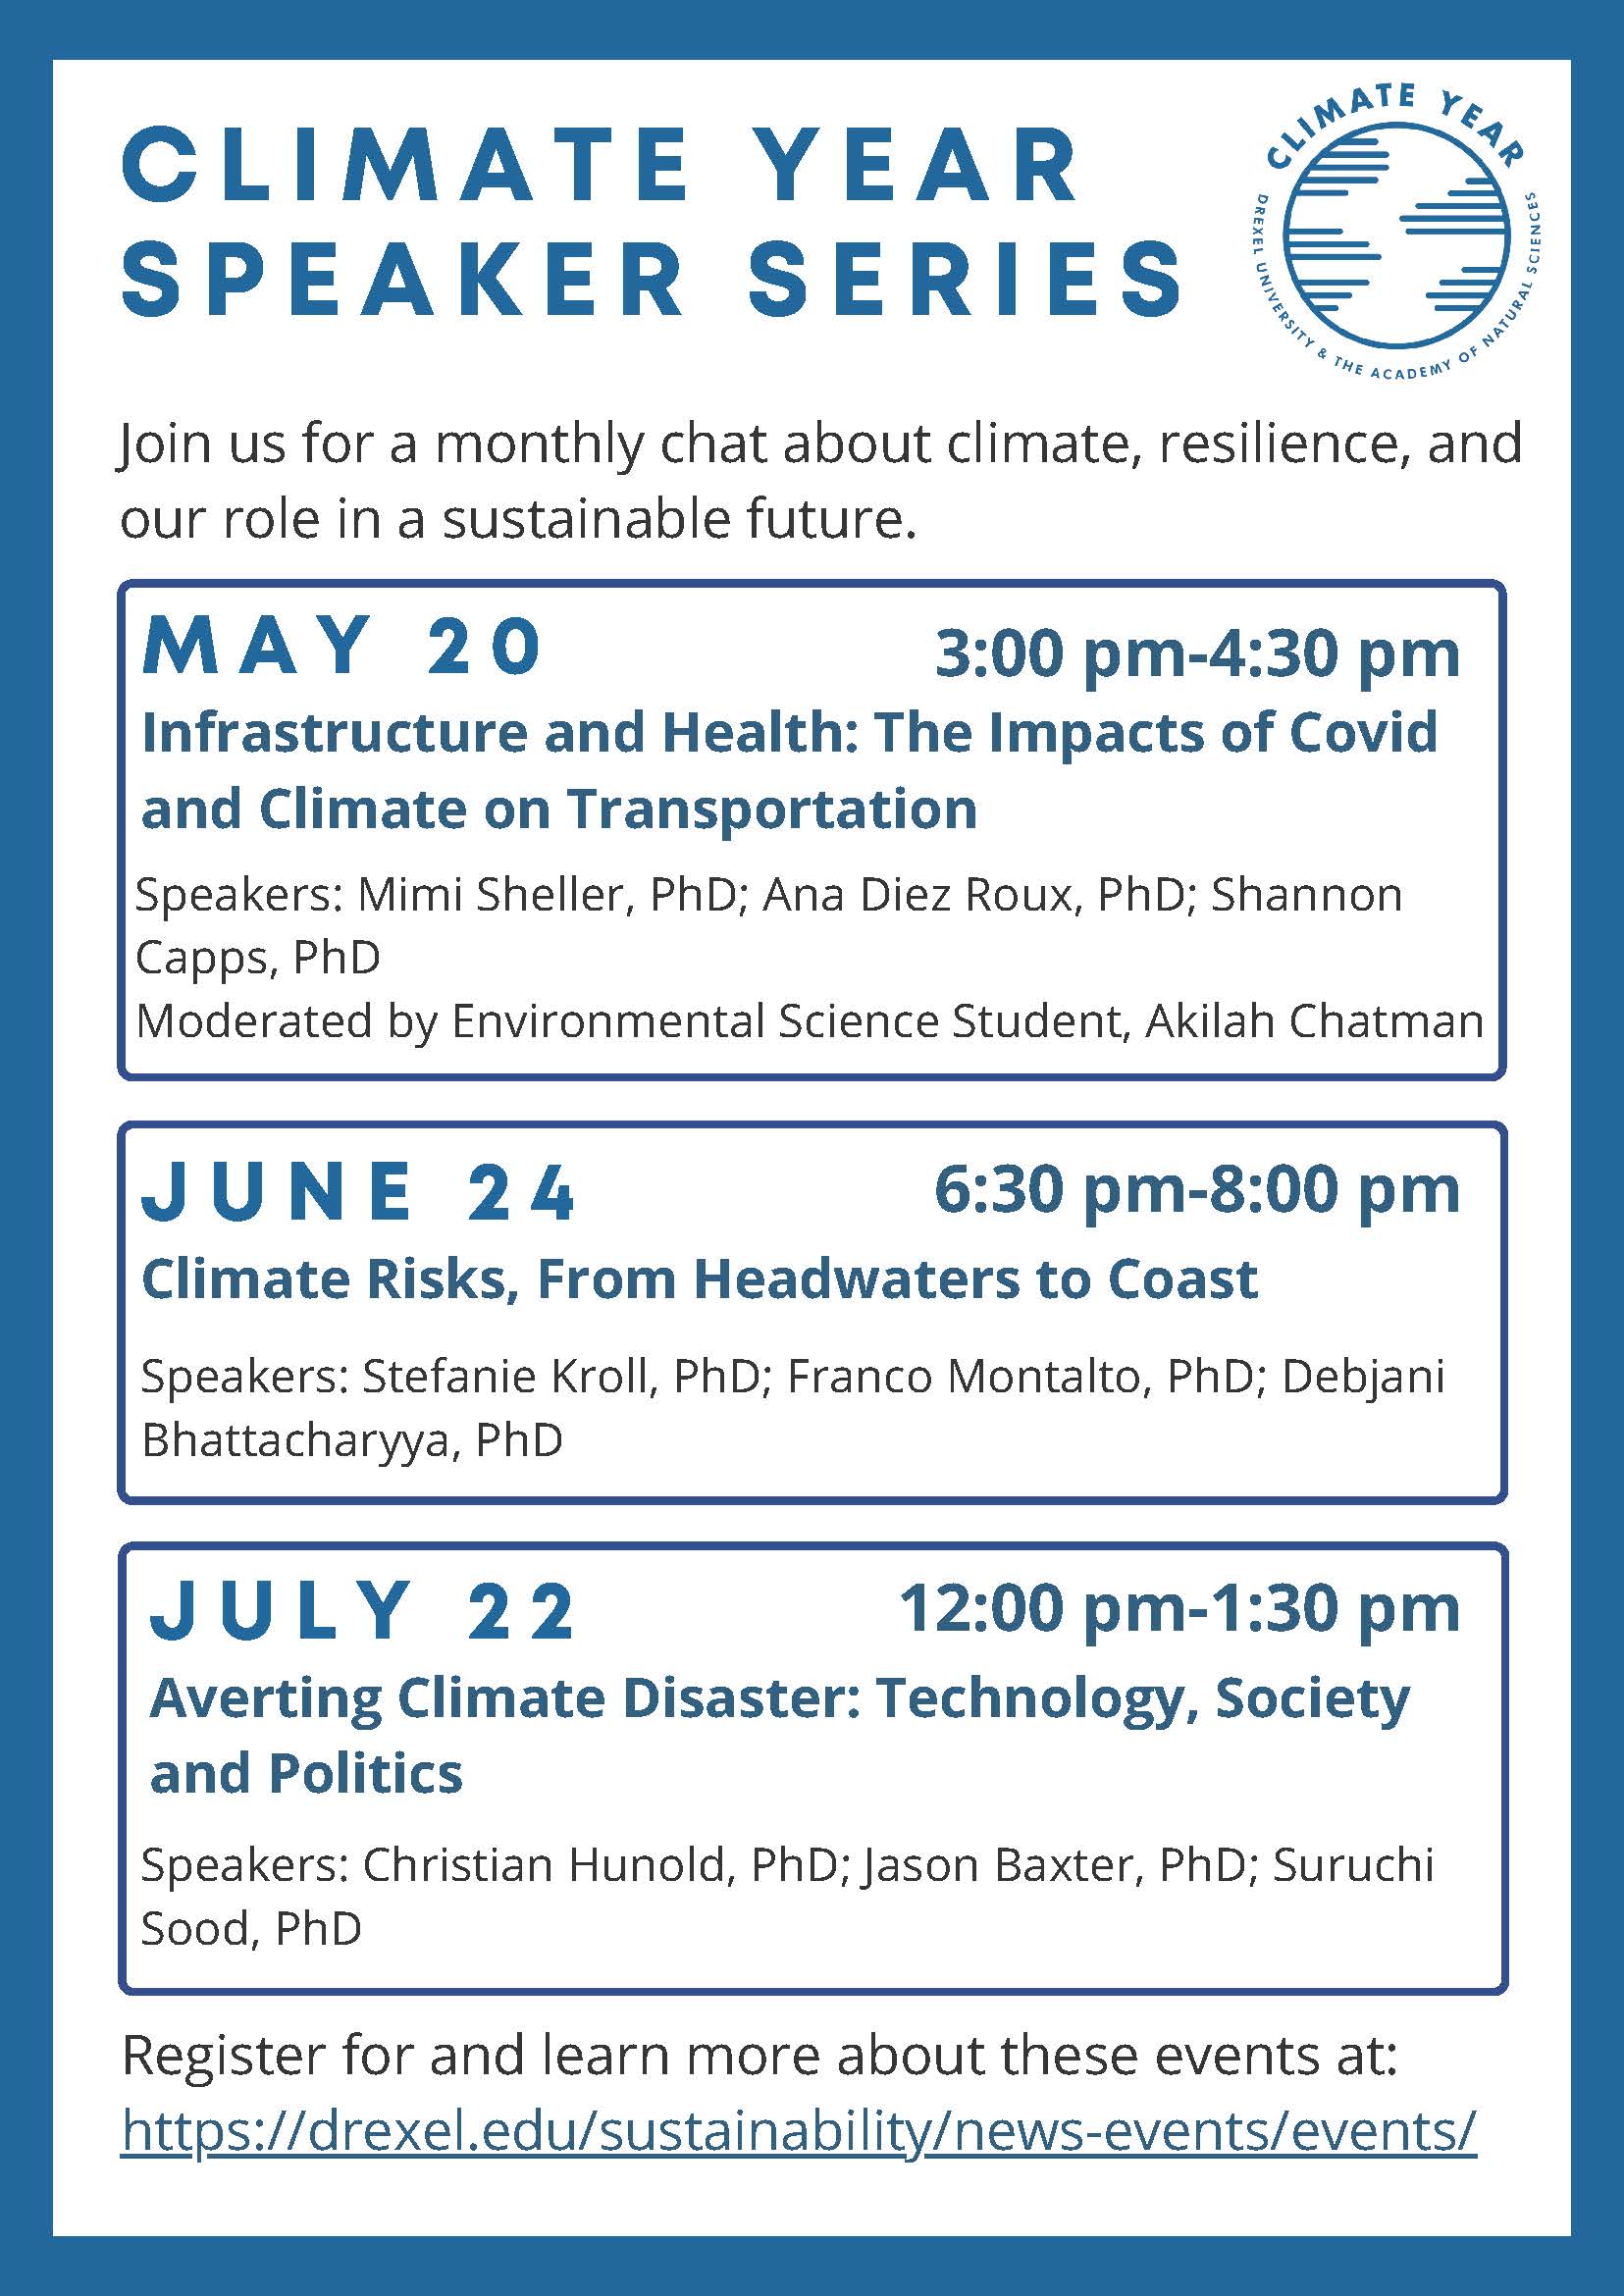 Announcing a Climate Year Speaker Series